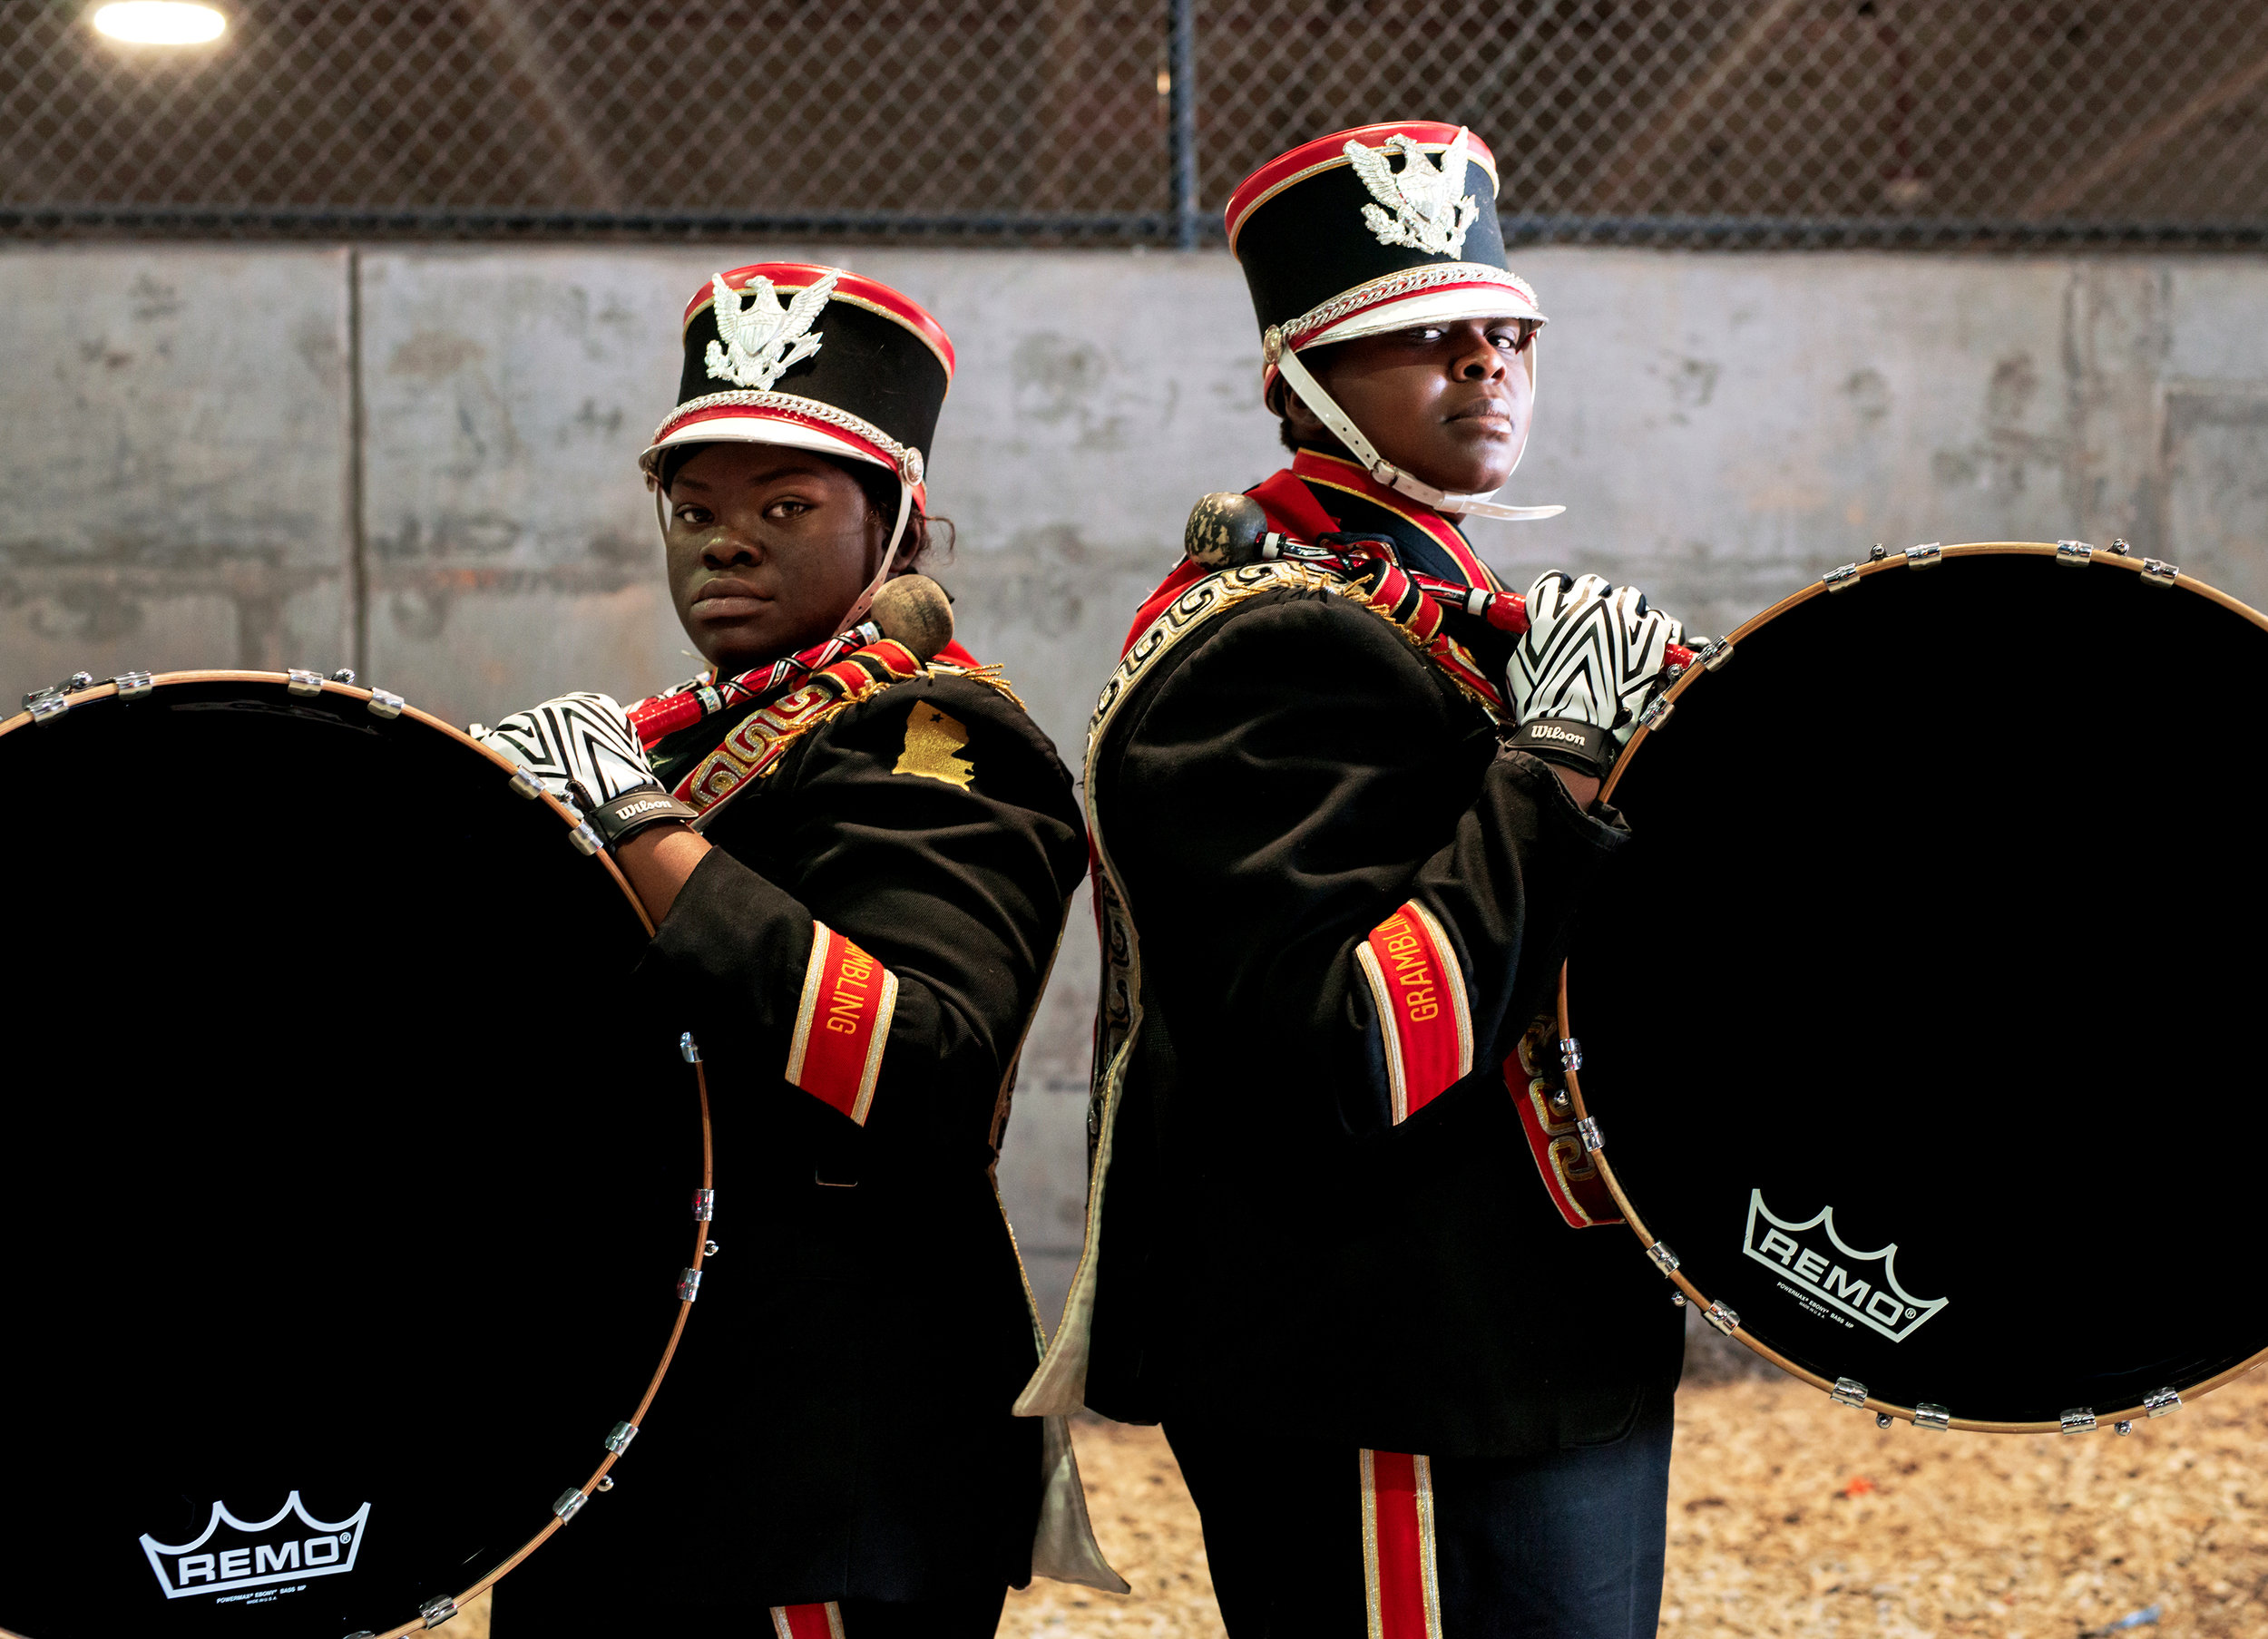  Grambling State Marching Band for  The Undefeated  